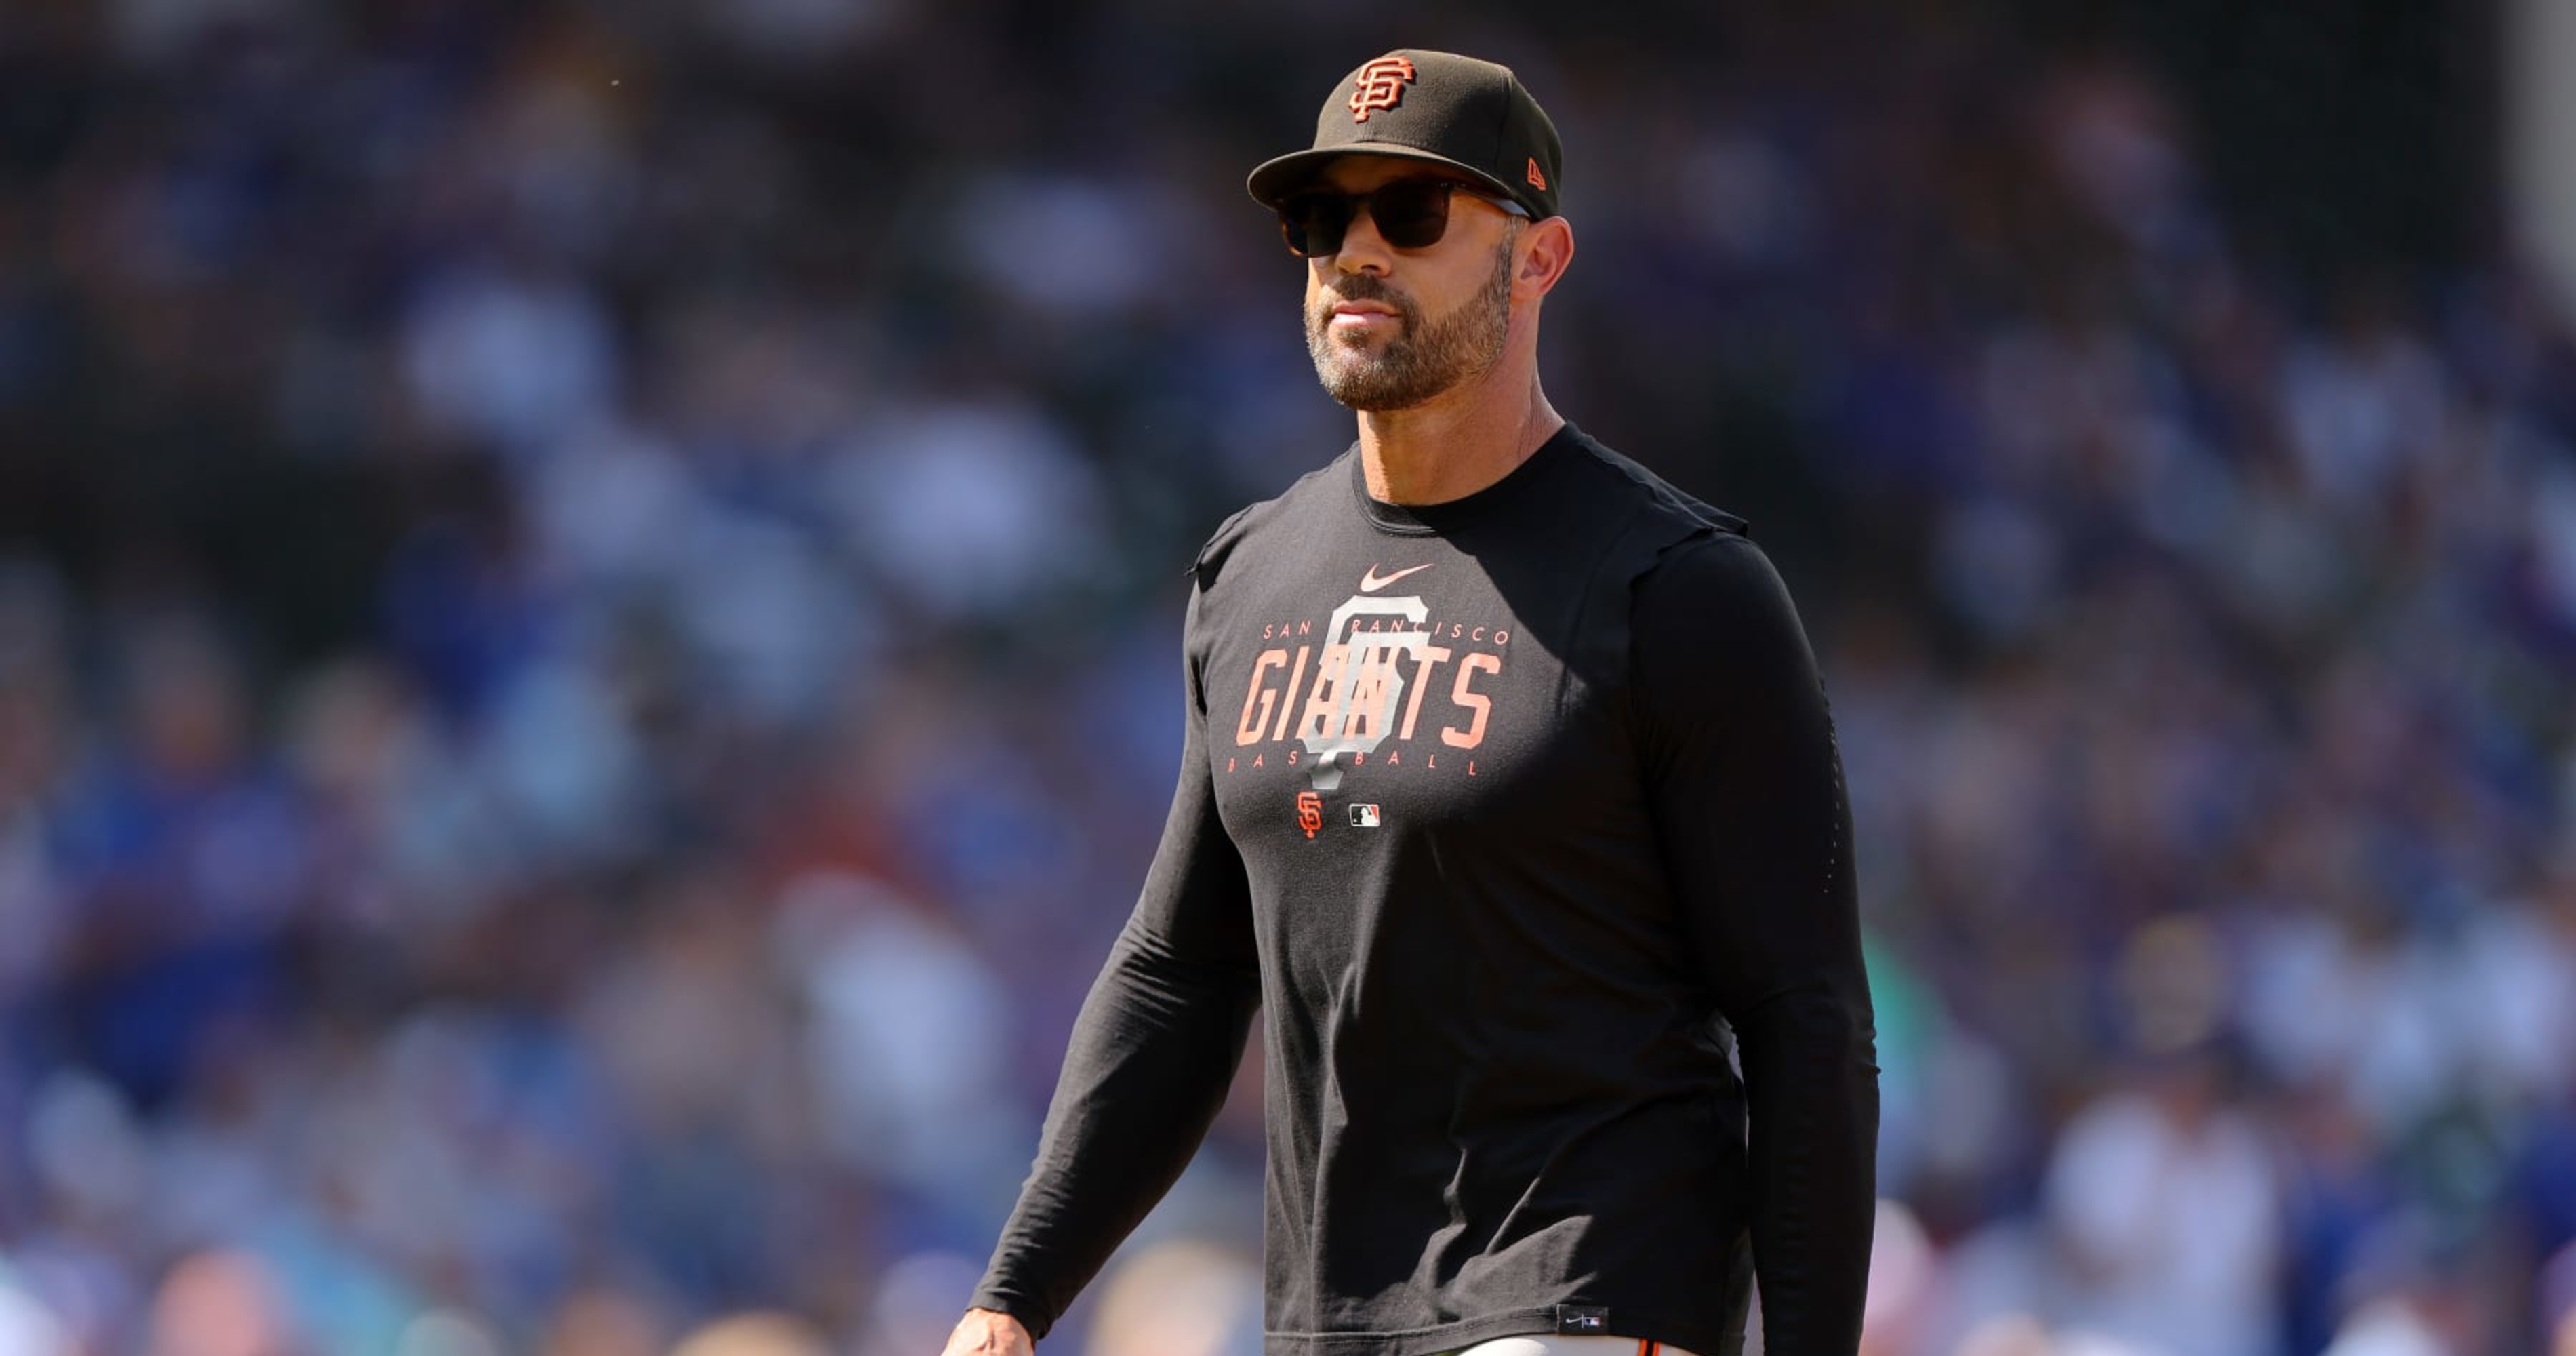 Giants manager Gabe Kapler gets contract extension through 2024